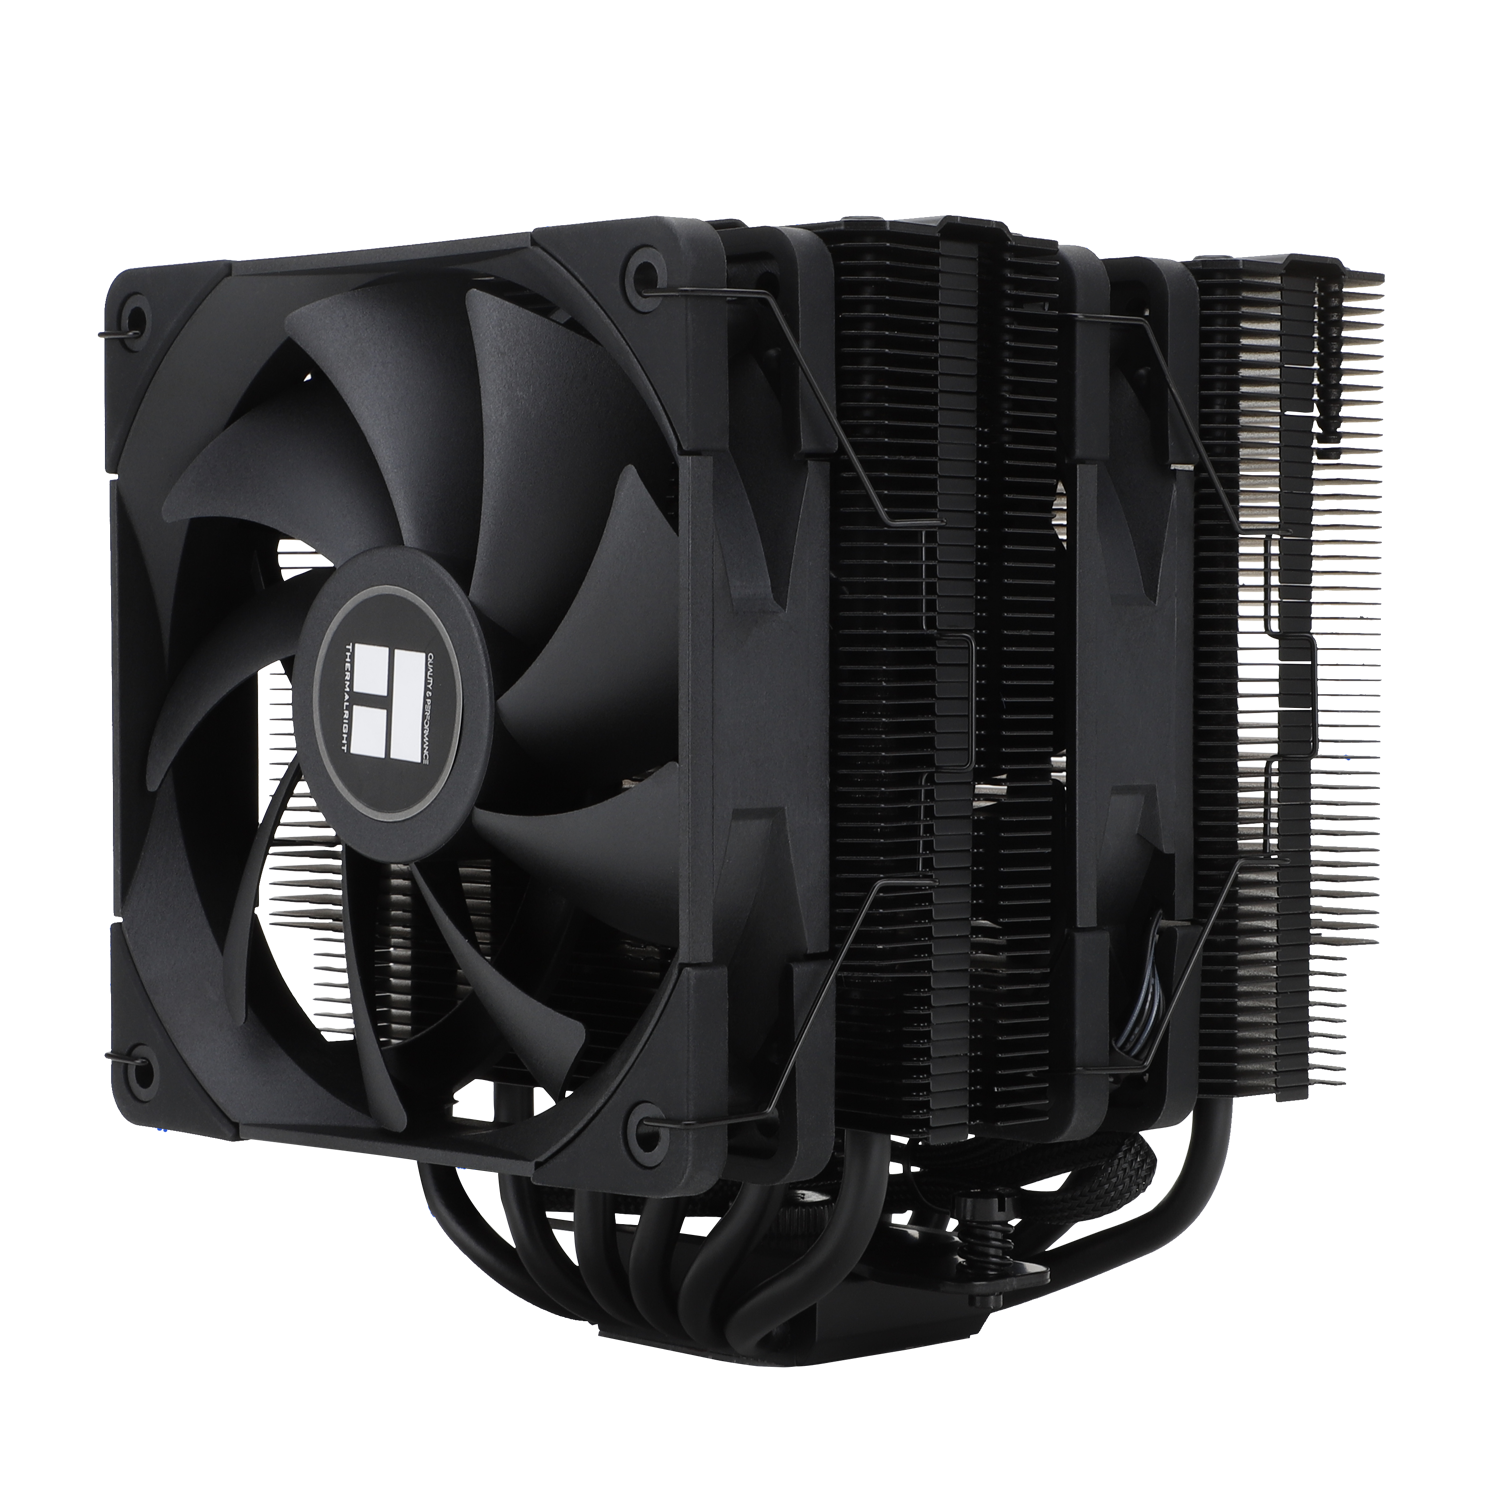 Thermalright Peerless Assassin 120 BLACK High Performance CPU  Cooler,Dual-Tower Design,120mm PWM Fan,6 Copper Heat Pipes CPU Air  cooler,AGHP Technology,For AMD AM4 AM5/Intel 1700/1150/1151/1200/20XX 